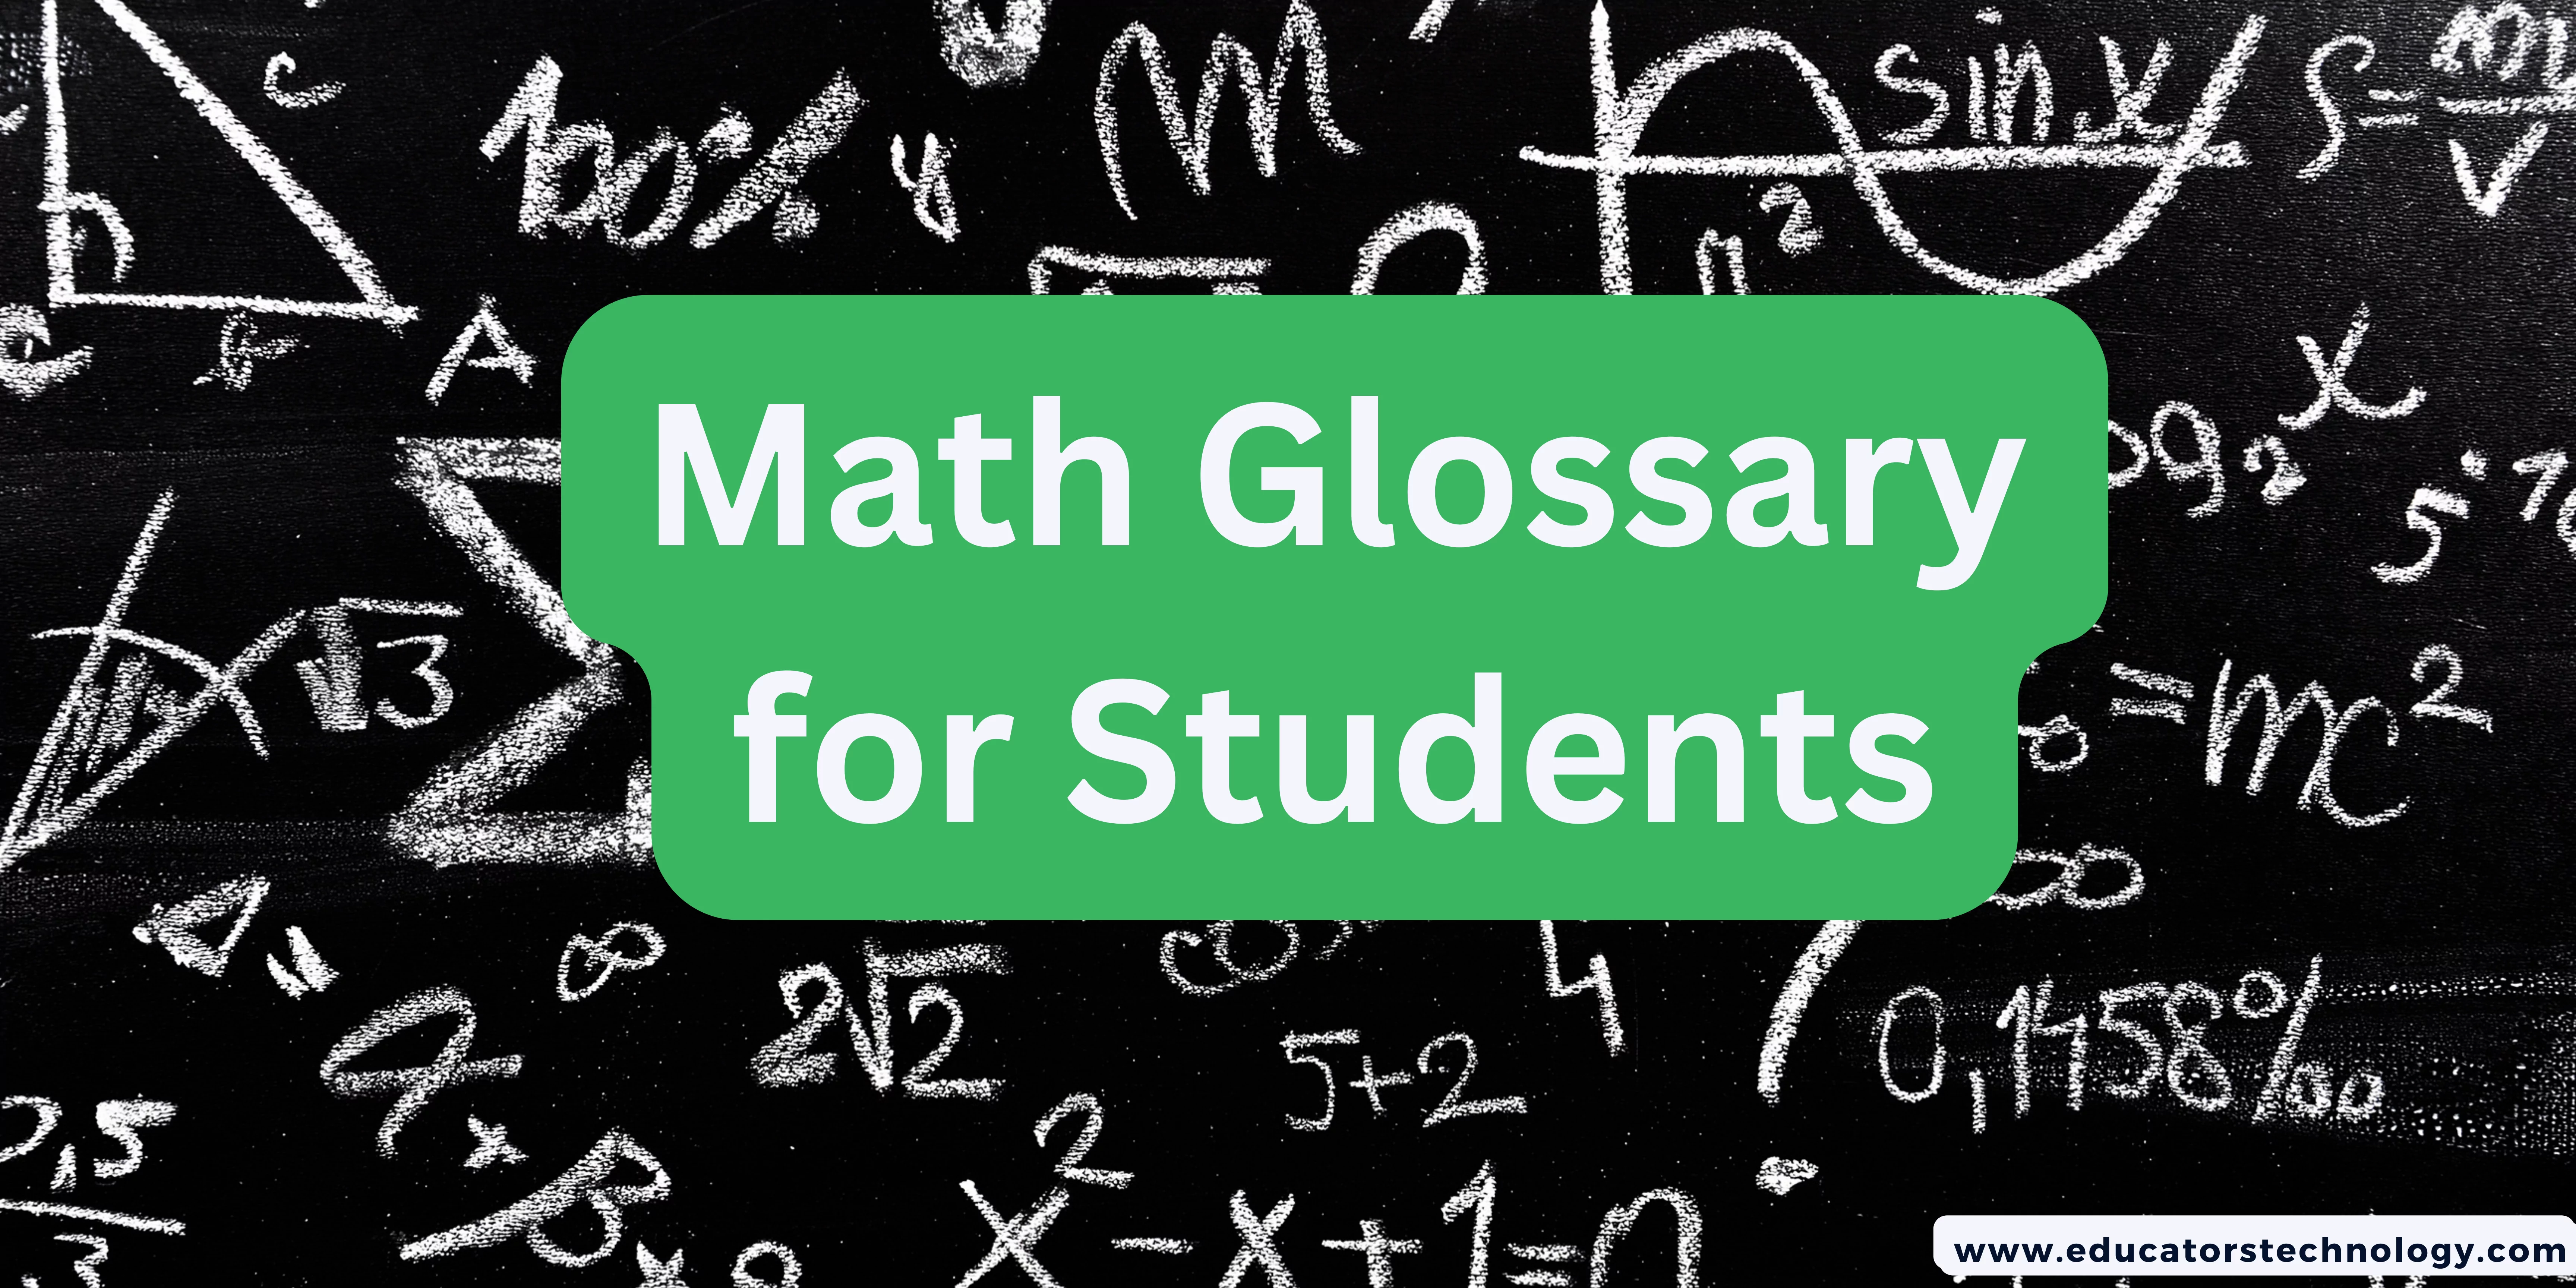 Glossary of Math Terms